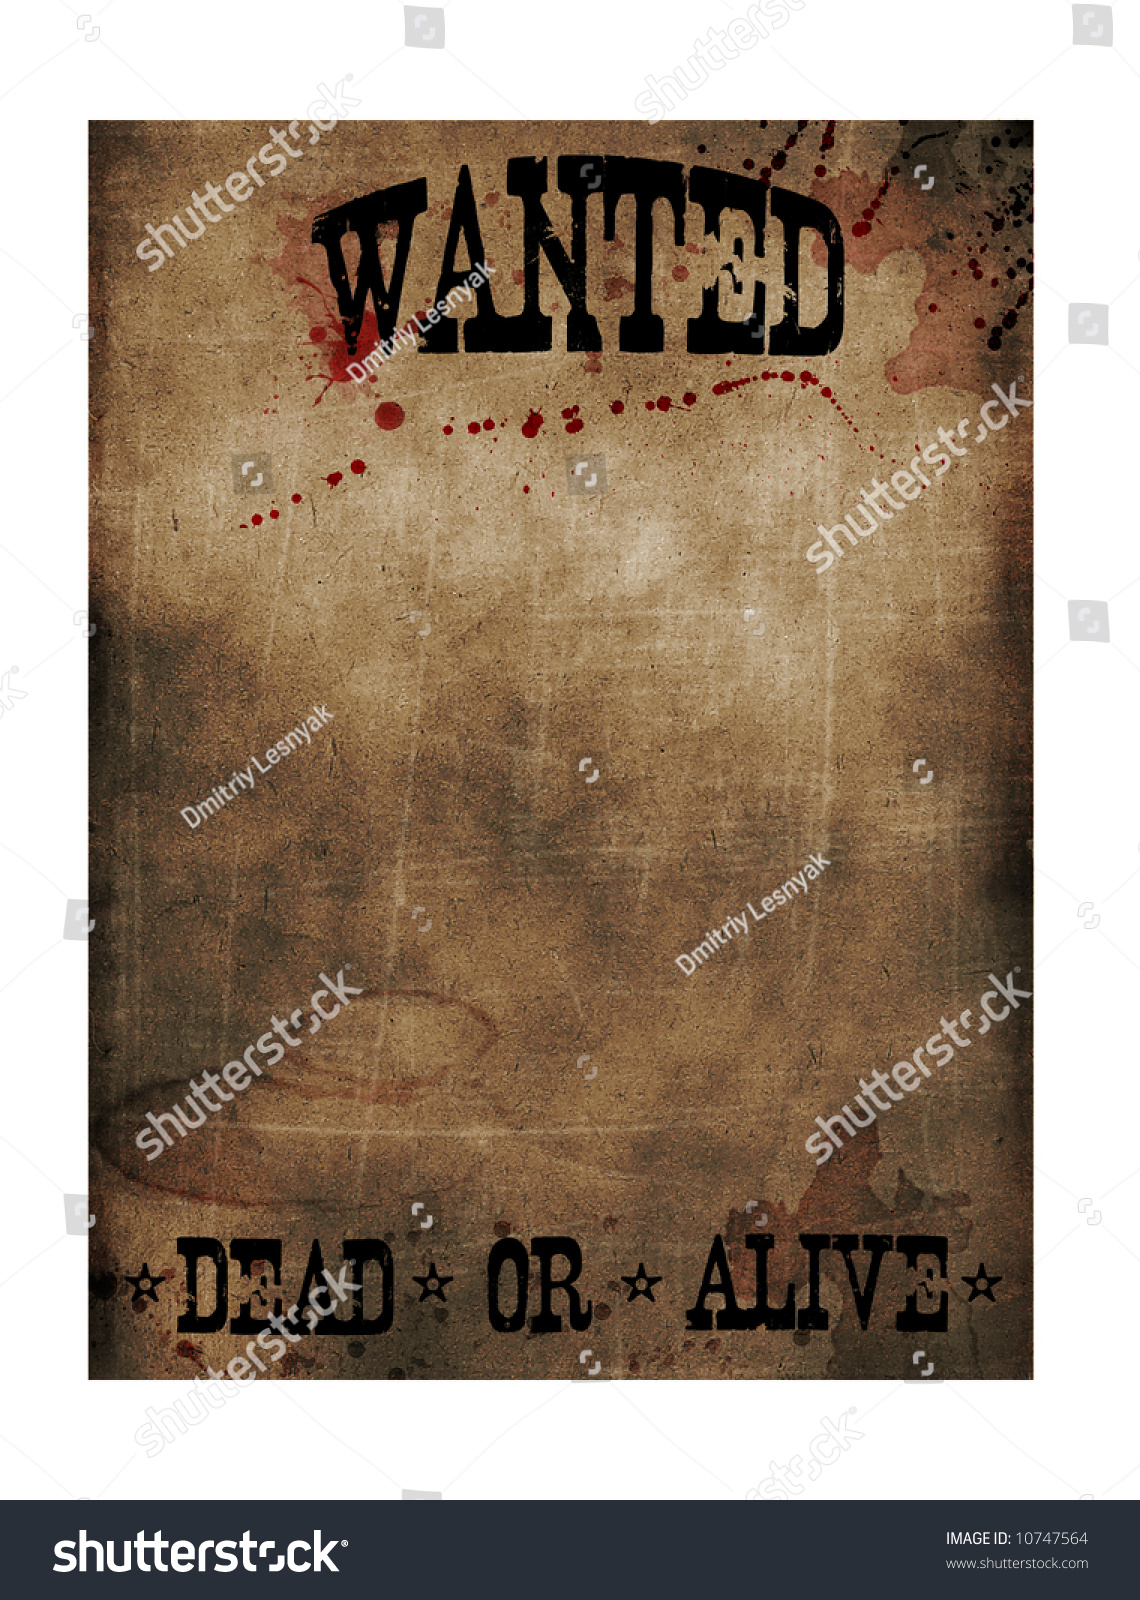 Wanted Dead Or Alive Sign Paper Stock Photo 10747564 : Shutterstock